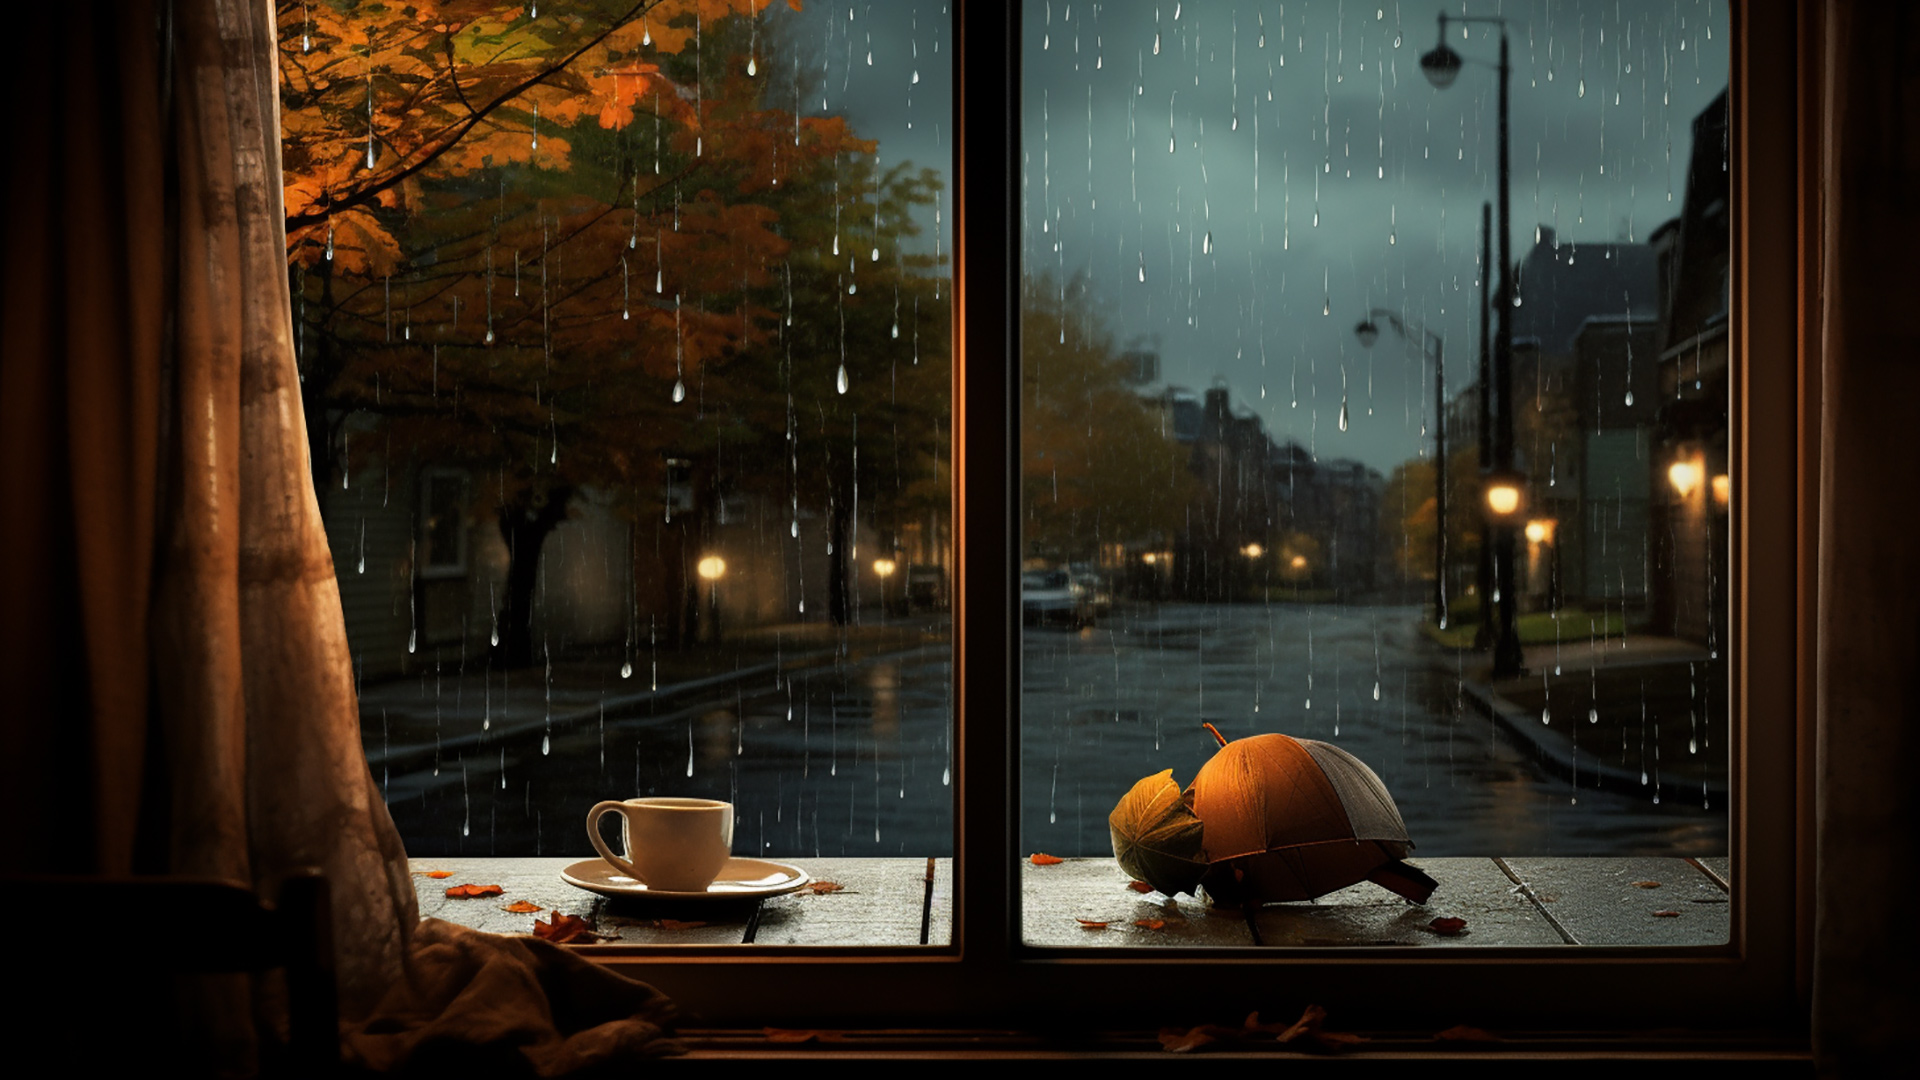 Digital daydreams: Rainy view desktop wallpapers for reflection